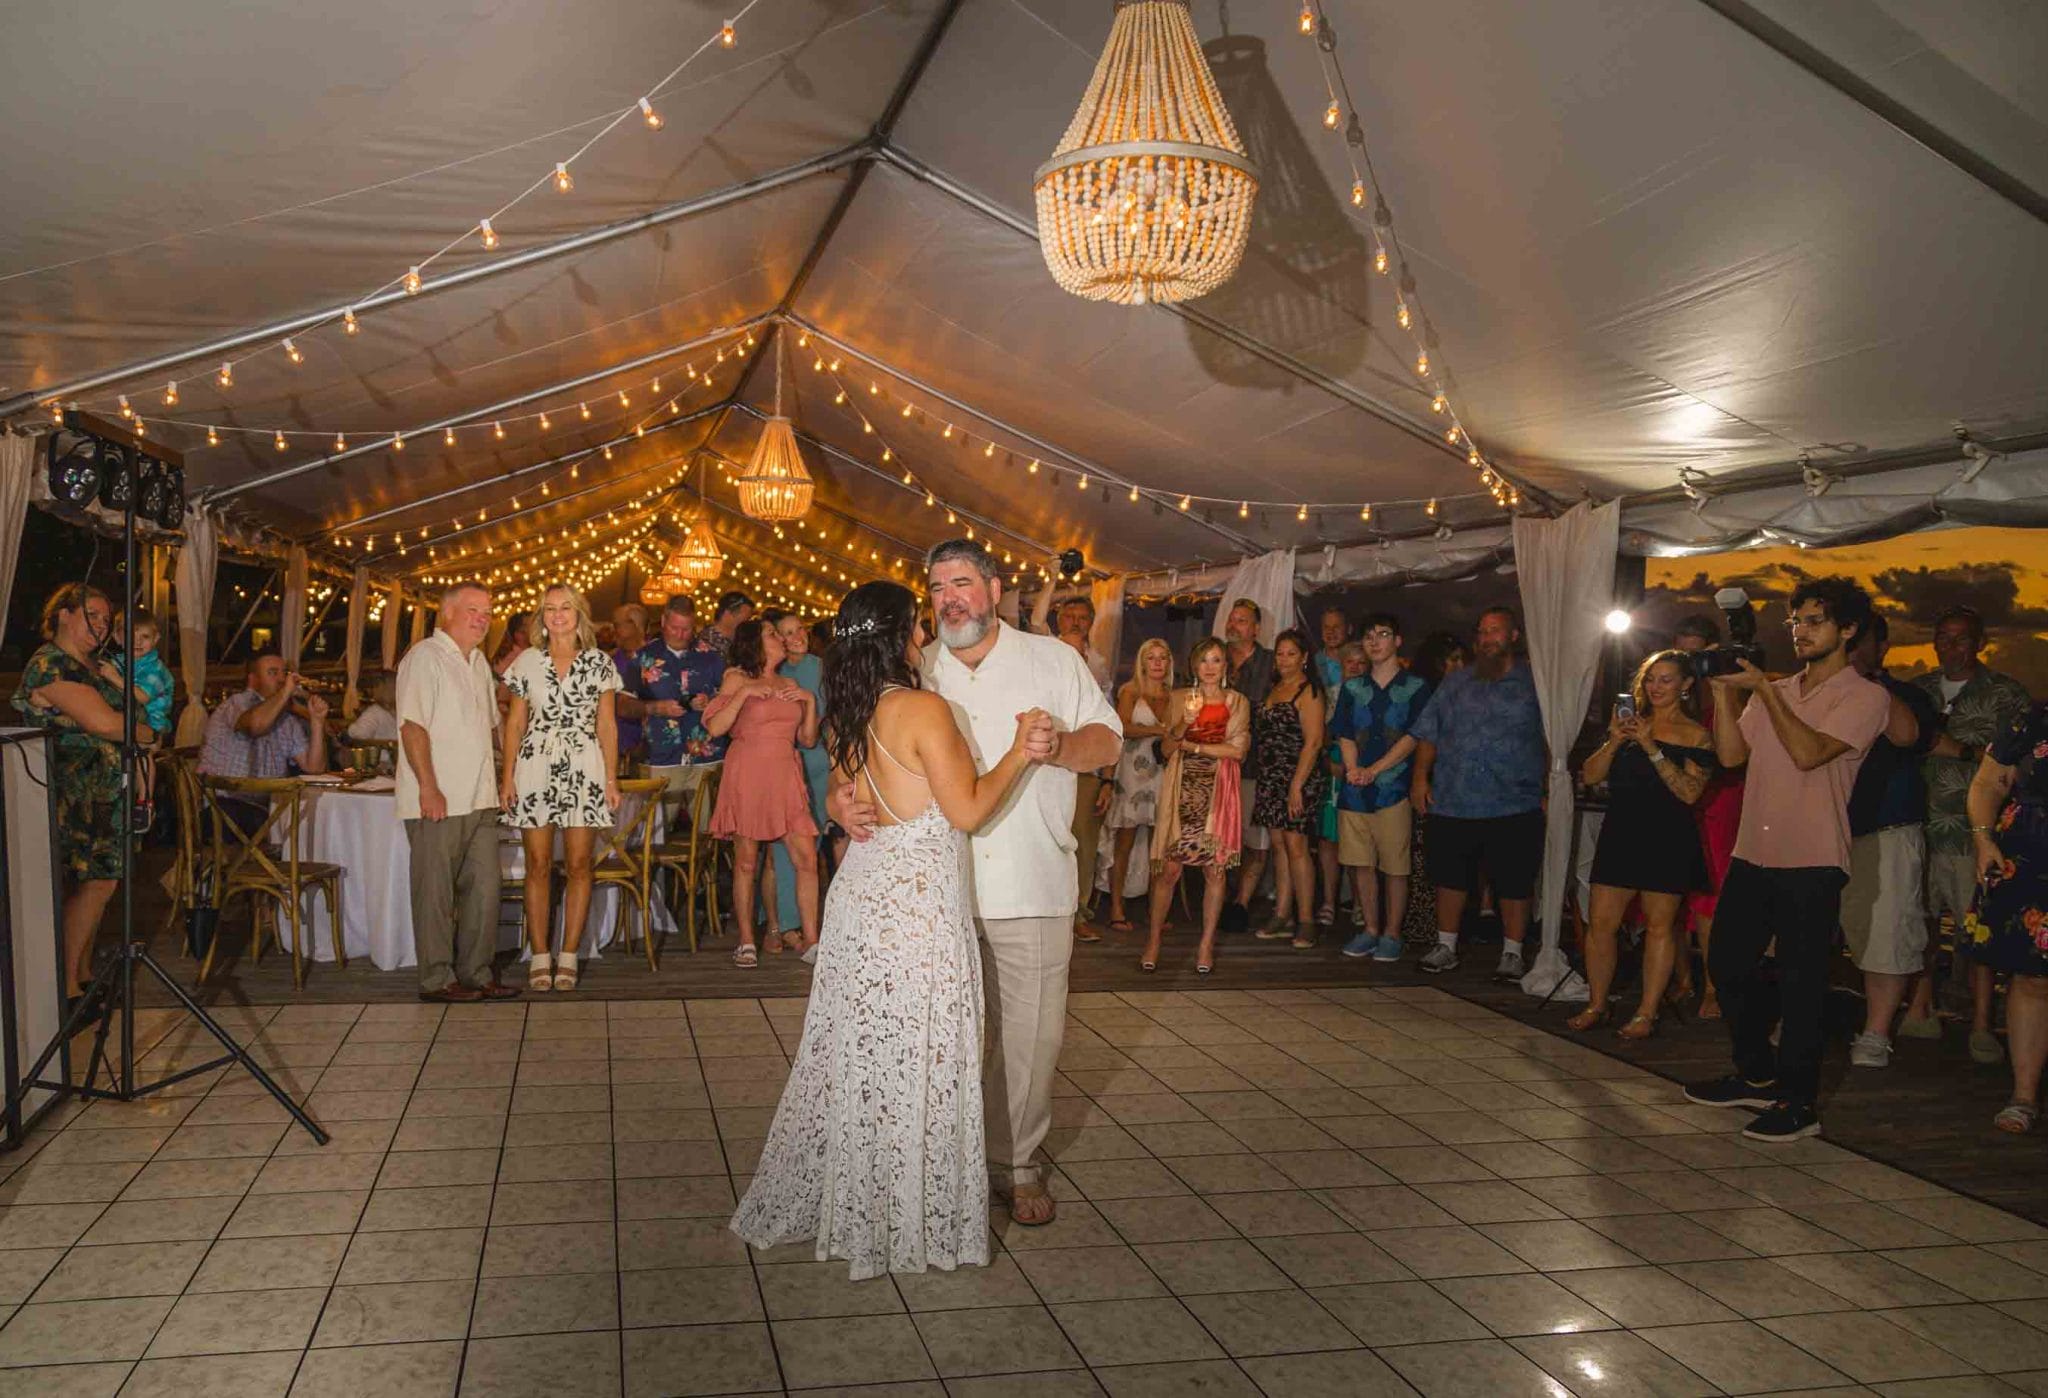 This image captures a joyous wedding reception at the Ocean Key Resort and Spa in Key West. The bride and groom are in the center of the dance floor, sharing a tender moment, surrounded by guests. The venue is adorned with string lights creating a warm, inviting glow that complements the dusky evening sky visible through the open sides of the tent. The scene is lively yet intimate, with the elegant attire of the guests adding to the festive atmosphere. The oceanfront setting, combined with the sophisticated decor, offers a glimpse into a memorable celebration at this destination wedding.